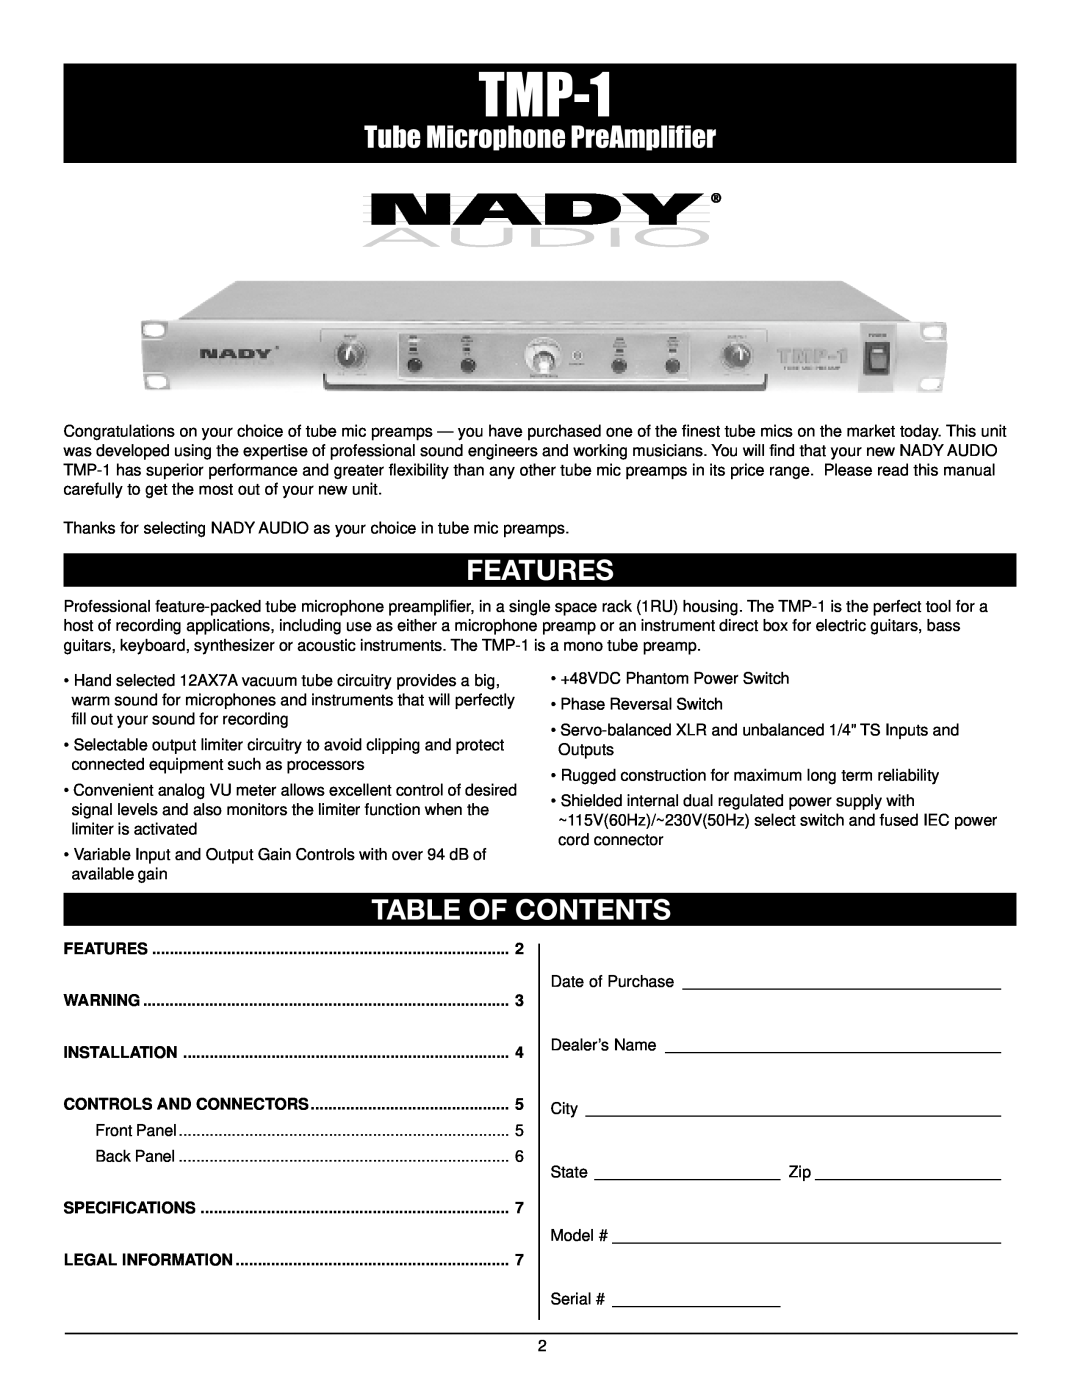 Nady Systems TMP-1 MICPREAMP owner manual Features, Table Of Contents, Tube Microphone PreAmplifier 